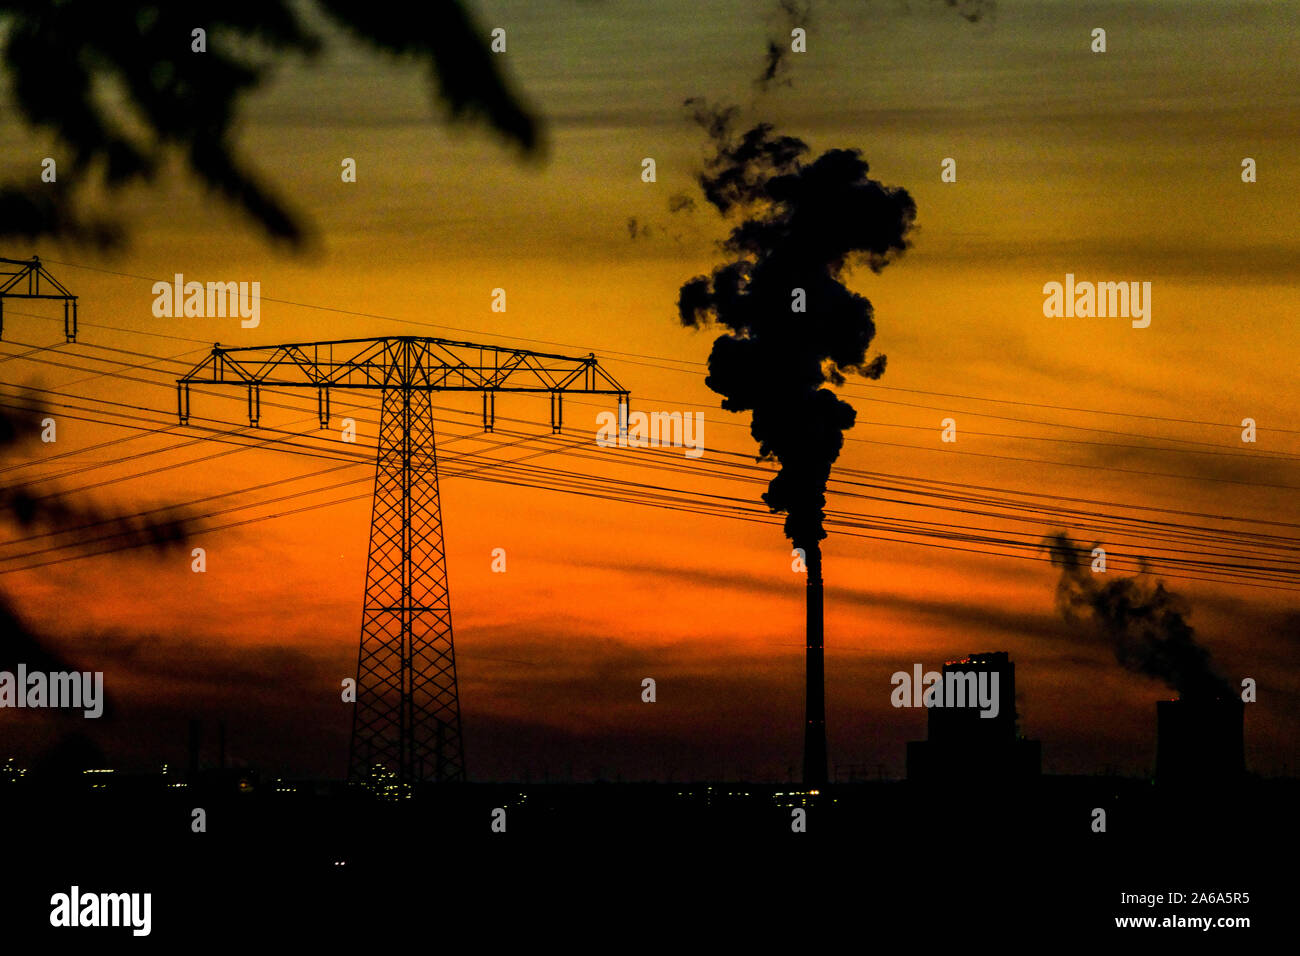 Global warming, power lines, chimney smoke at sunset Germany industry climate change carbon climate change co2 emissions energy Rising smoke Scene Stock Photo